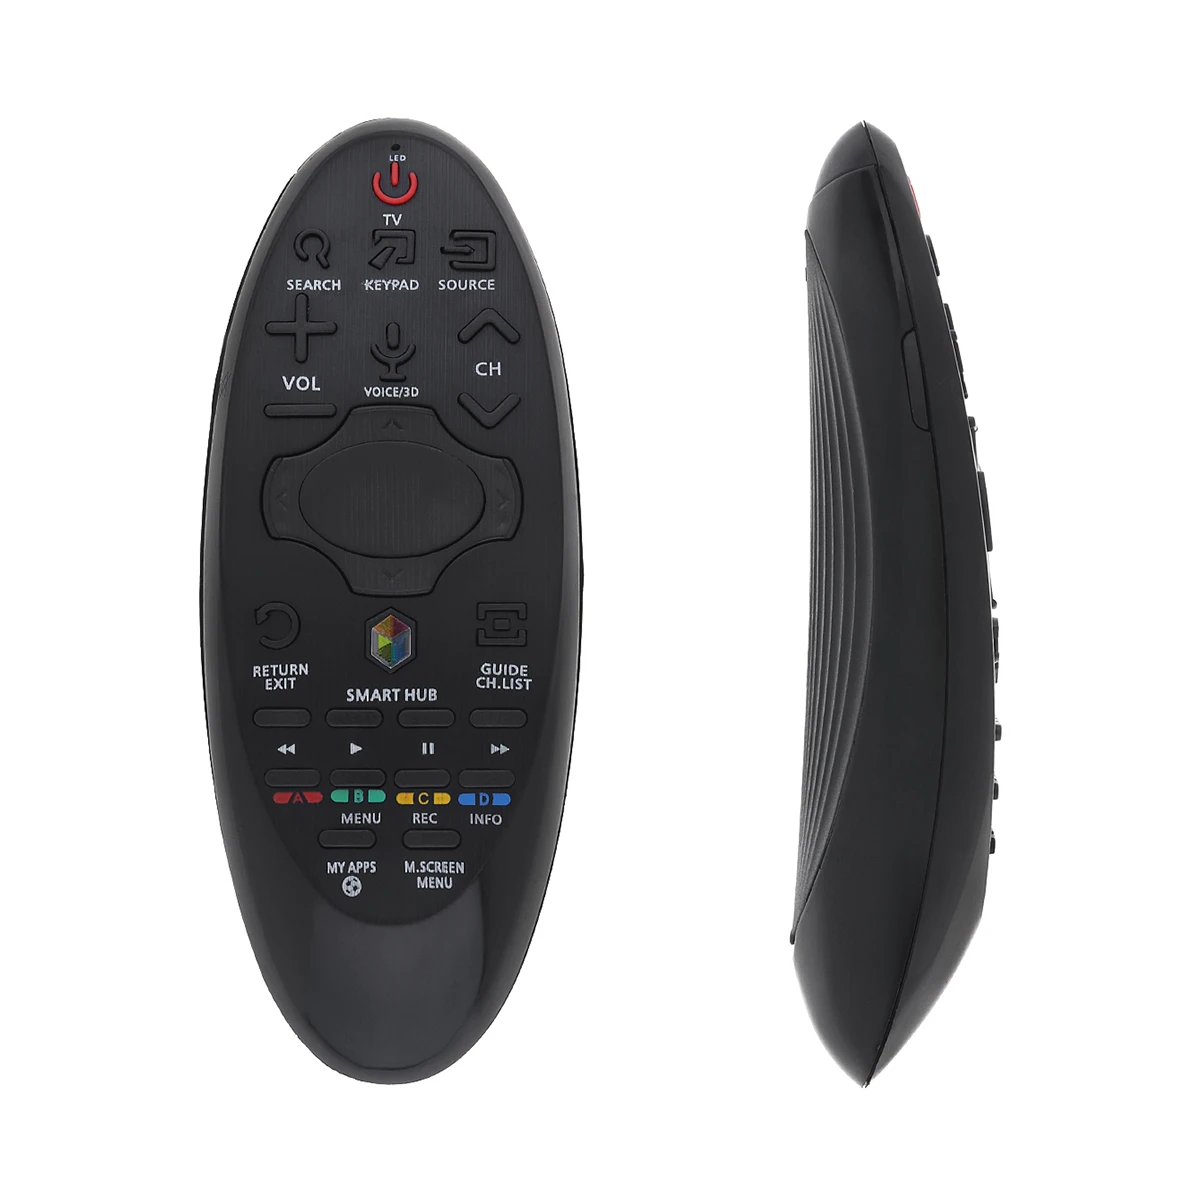 IR Remote Control Fit for Smart TV BN59-01185D BN59-01184D BN59-01182D BN59-01181D BN94-07469A BN94-07557a BN59-01185A